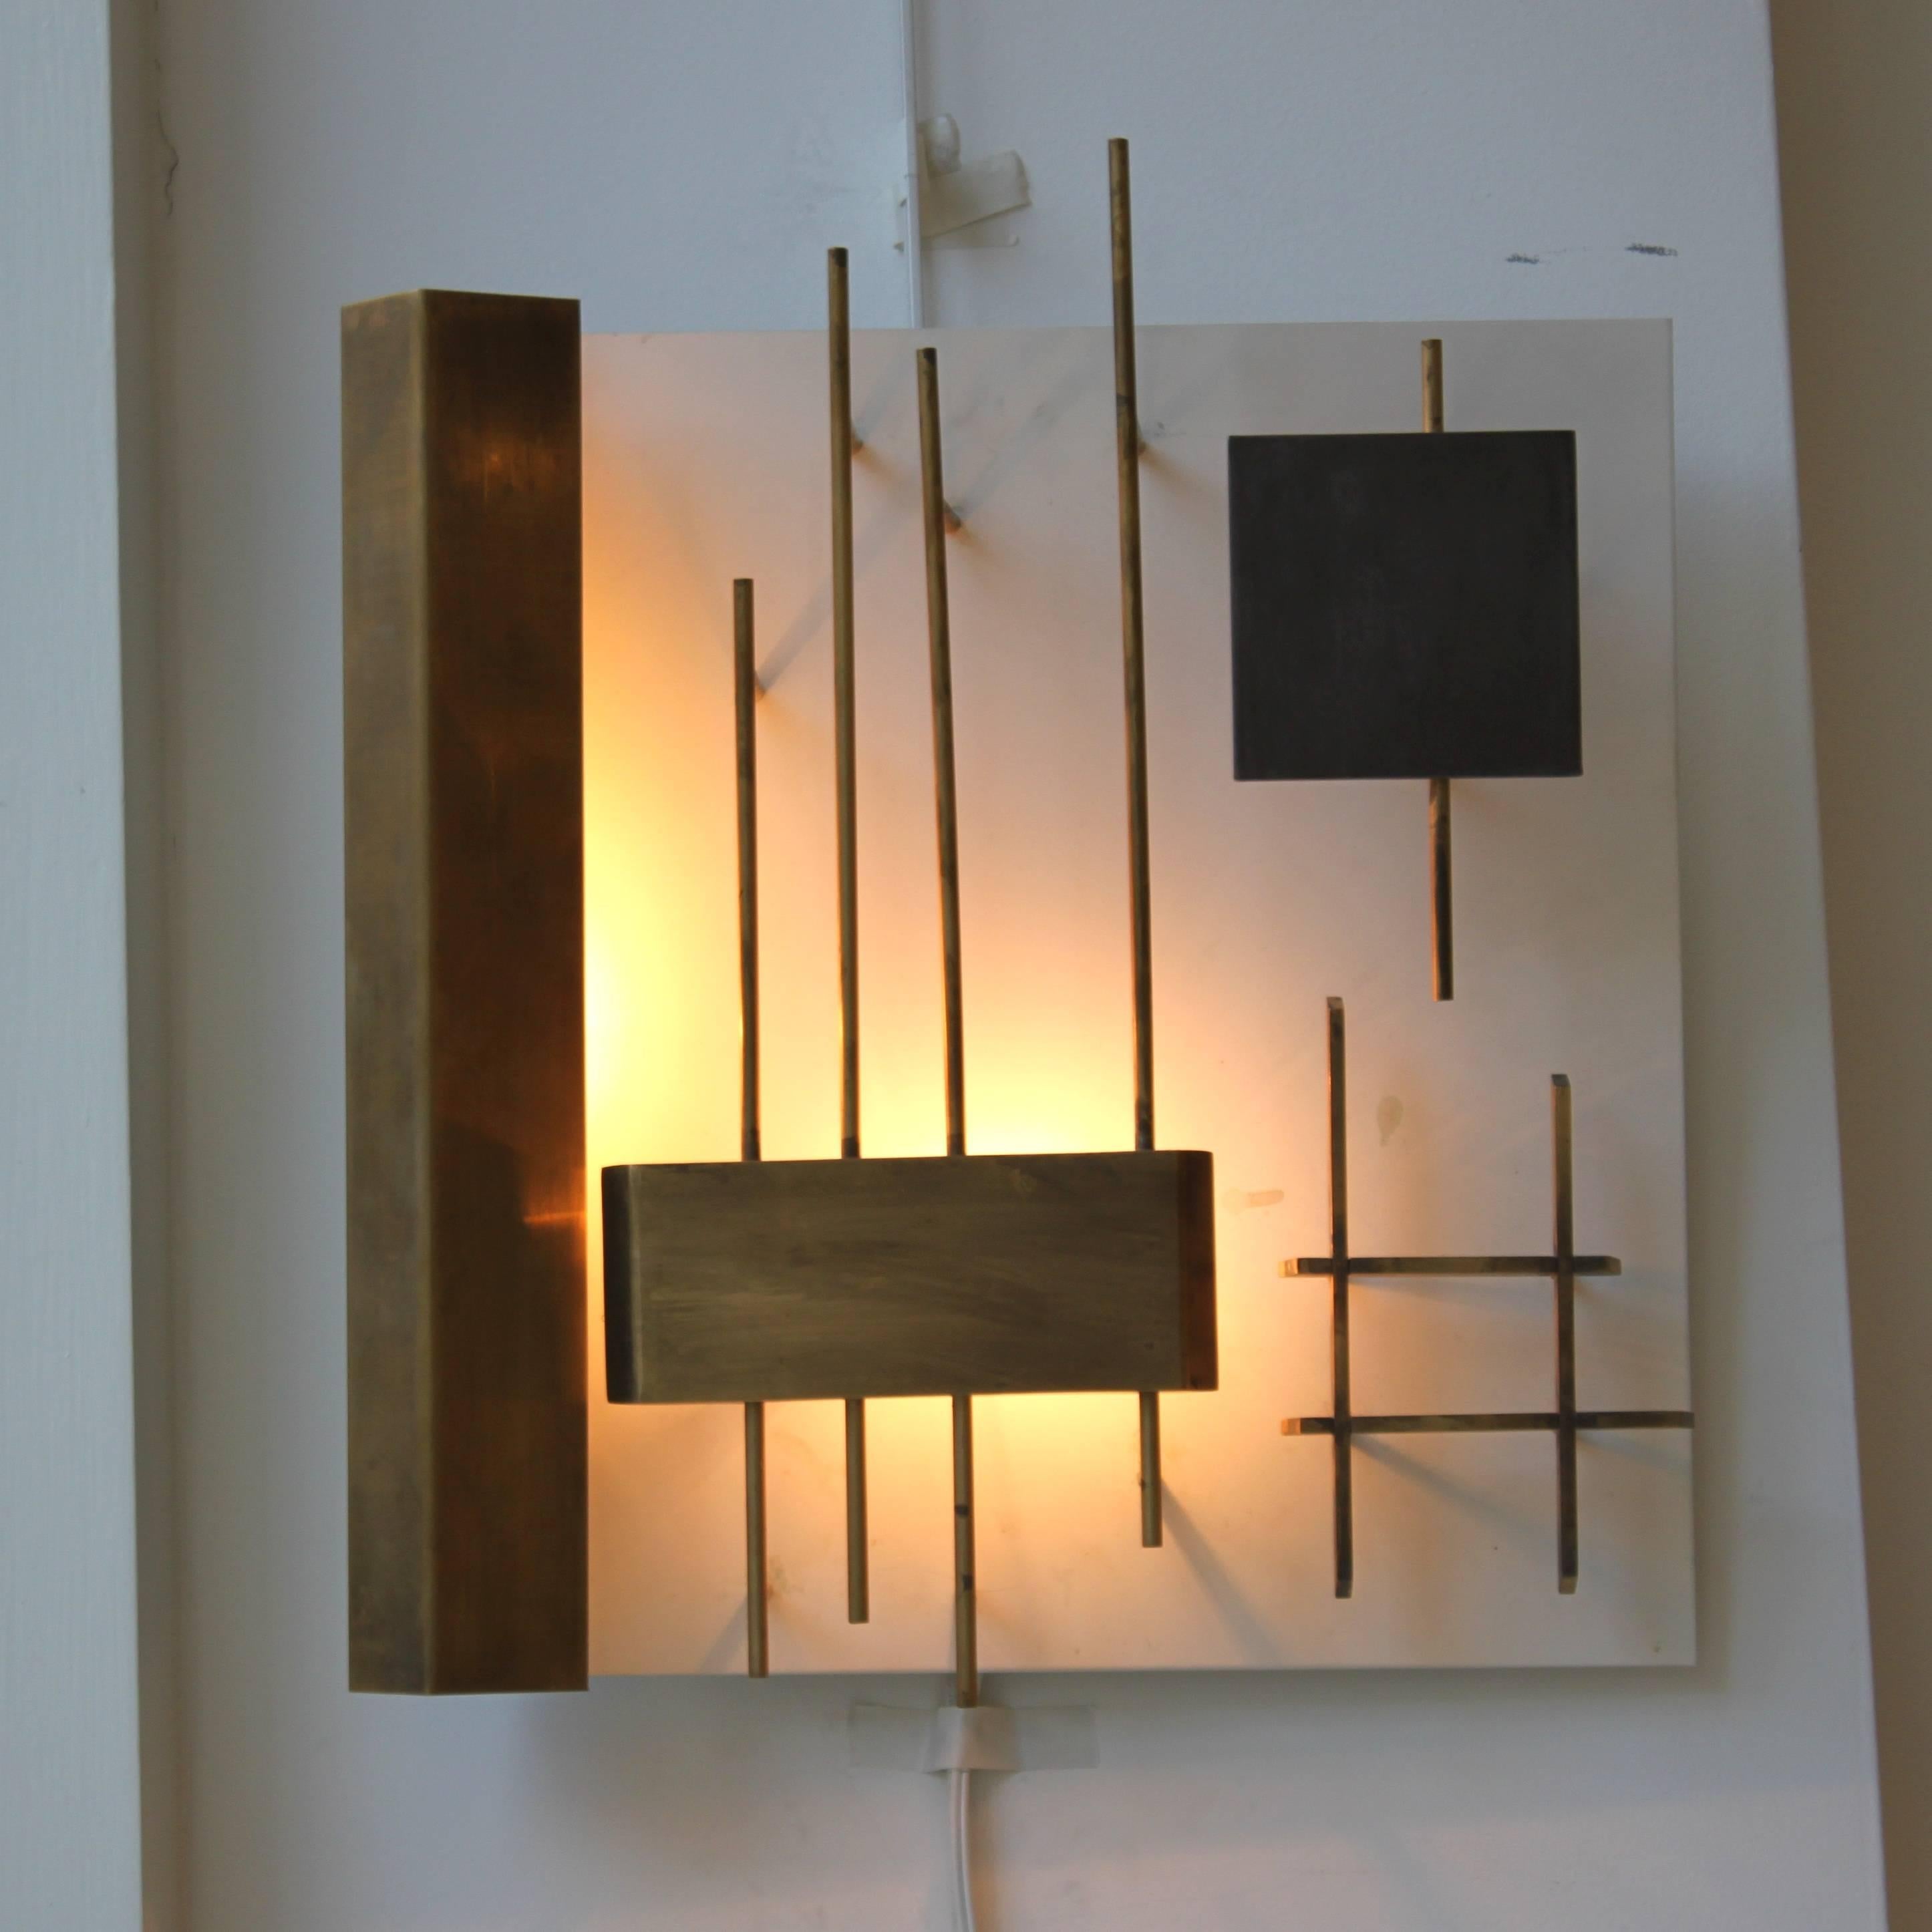 Two brass wall lights by Gio Ponti designed and made in Italy in early 1960s.

Produced by Lumi. Model number 575.

Published.

These two wall lamps have brass and painted geometric elements set on a white painted backplate. One has a single